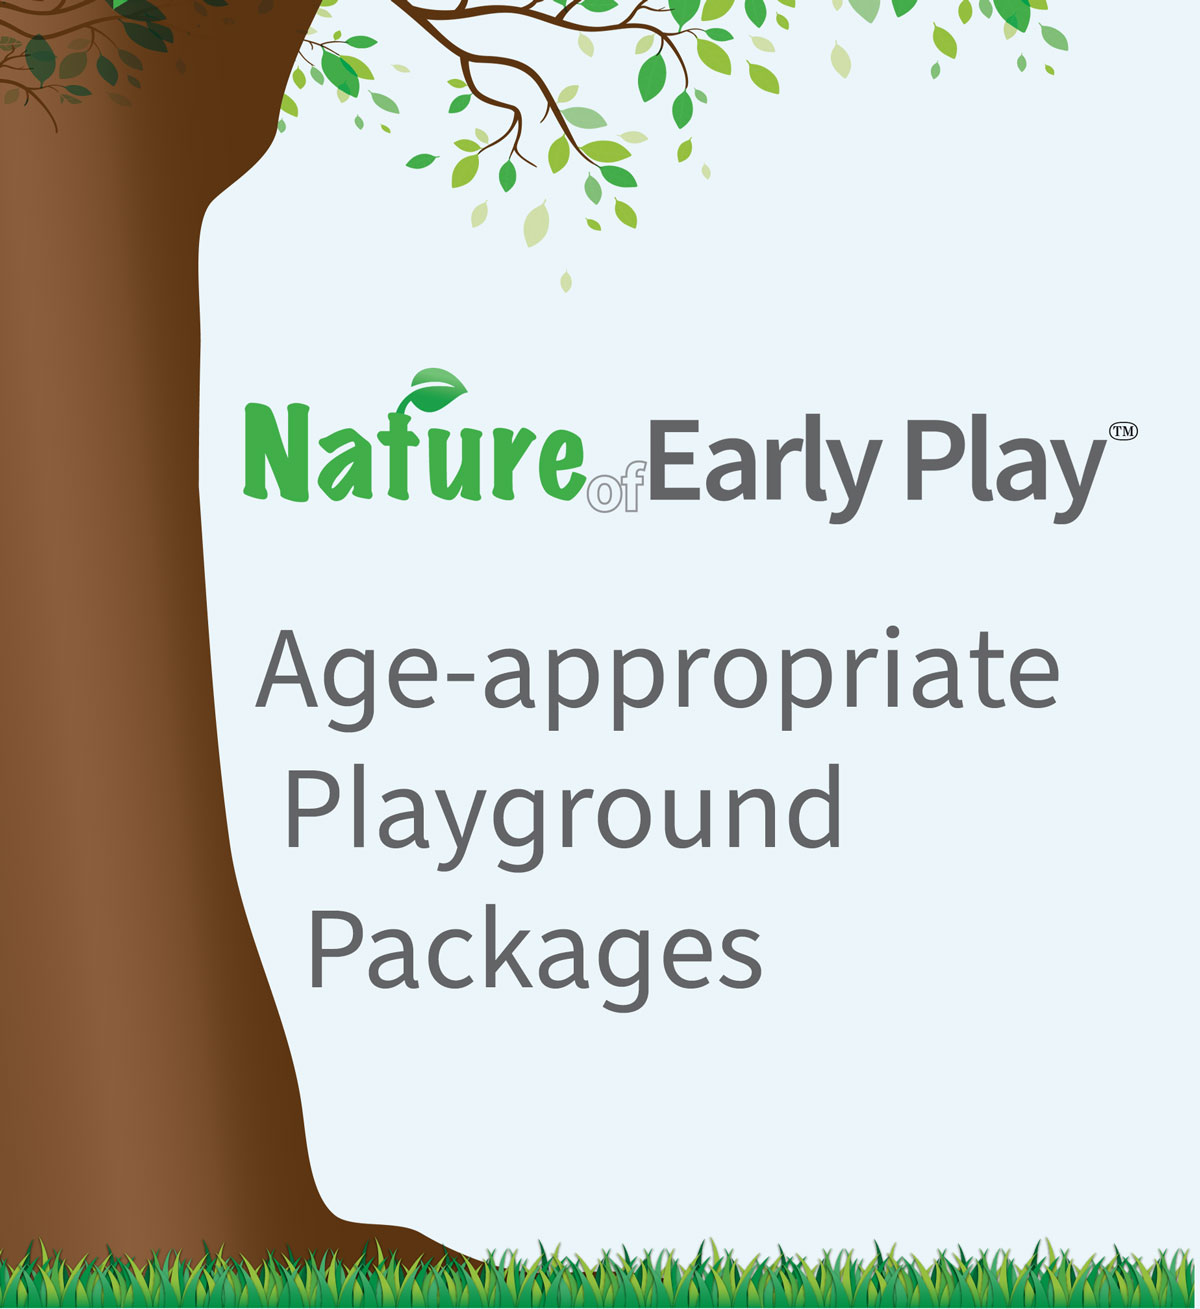 Playground Packages